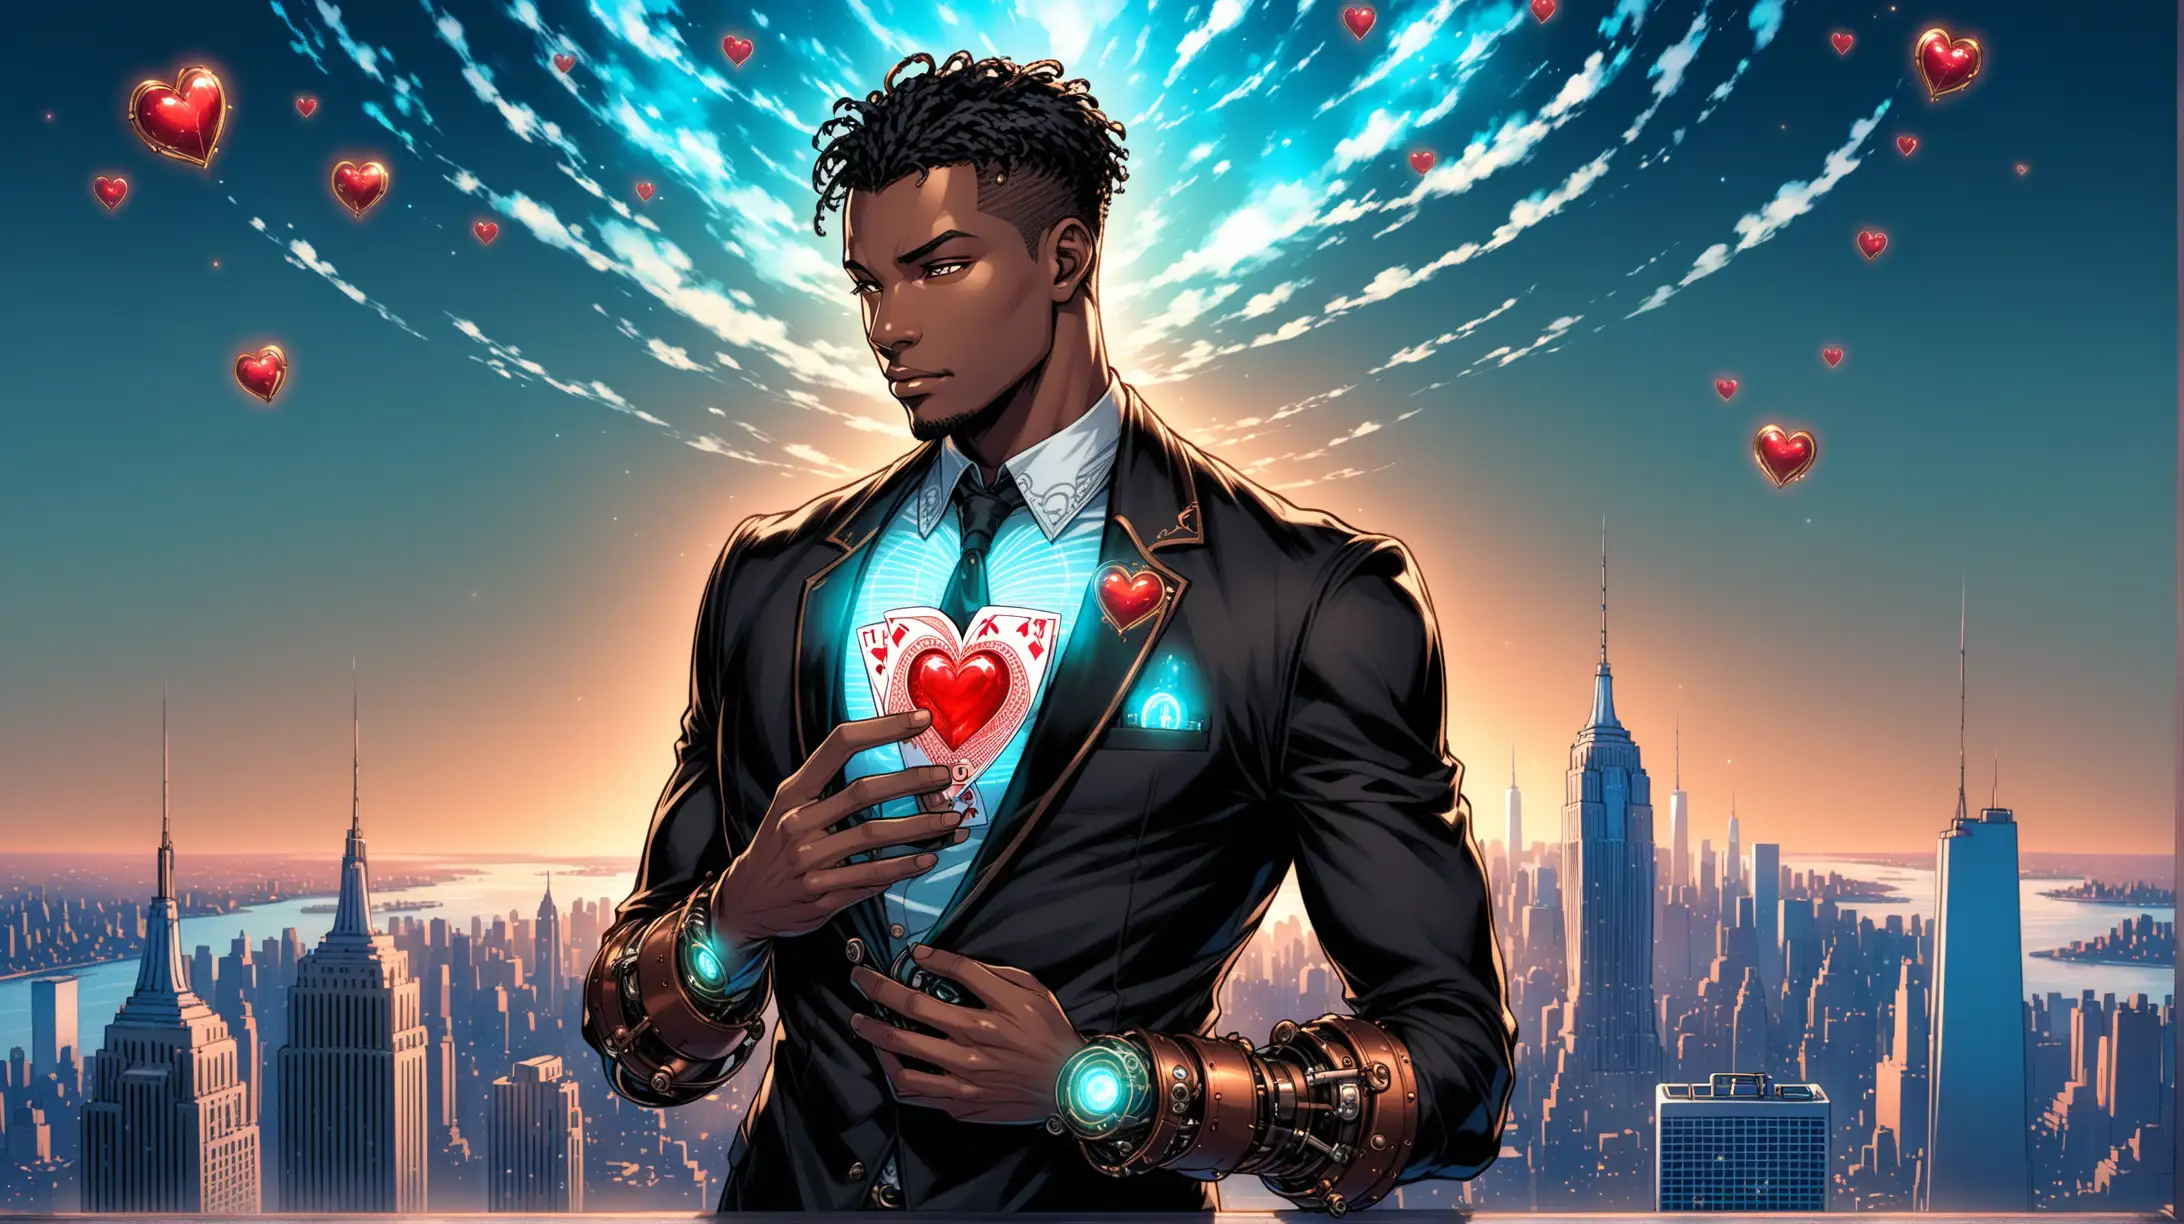 A handsome African American man fit body type lightly toned stands dressed in a black blazer and pants we see his bare chest and the black metal steampunk gadget implanted in his bare chest the gadget displays a human heart on the screen and glows blue and holds a deck of playing cards as he towers in the sky looking down over new york city